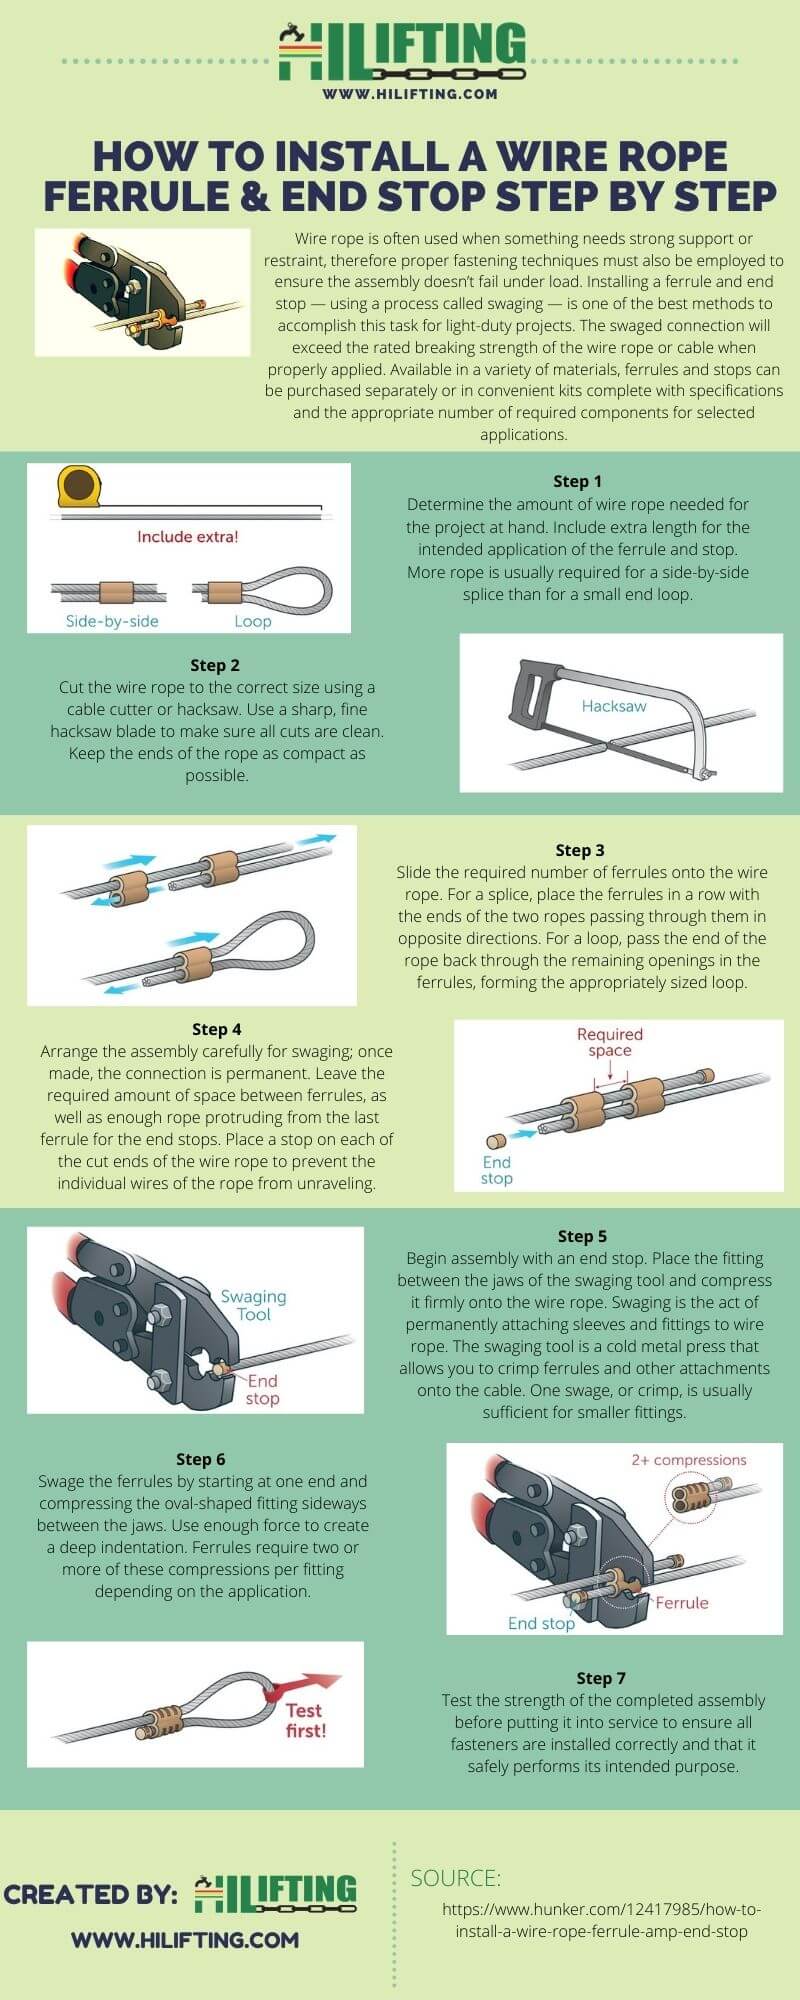 How To Install A Wire Rope Ferrule & End Stop Step By Step(Infographic)